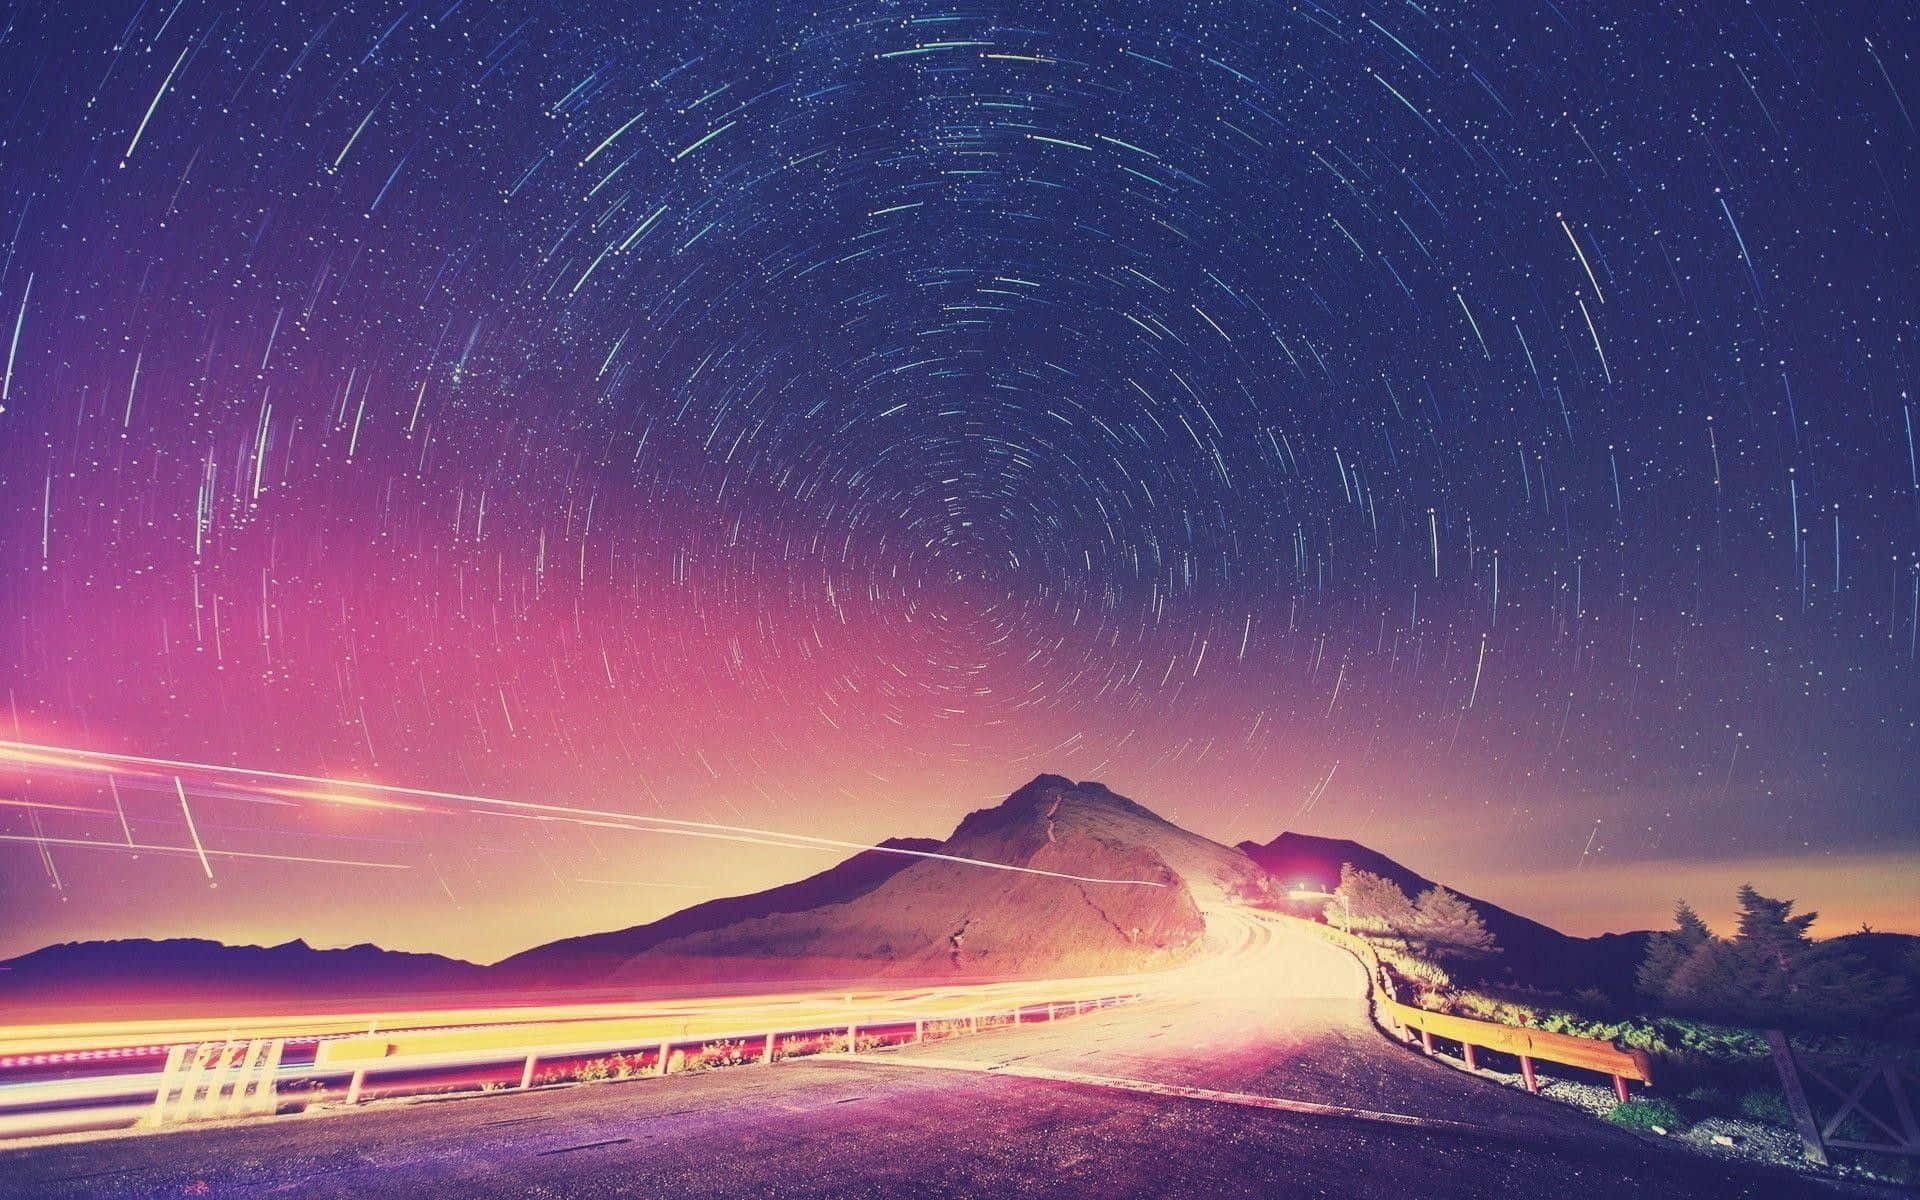 A Road With Star Trails In The Sky